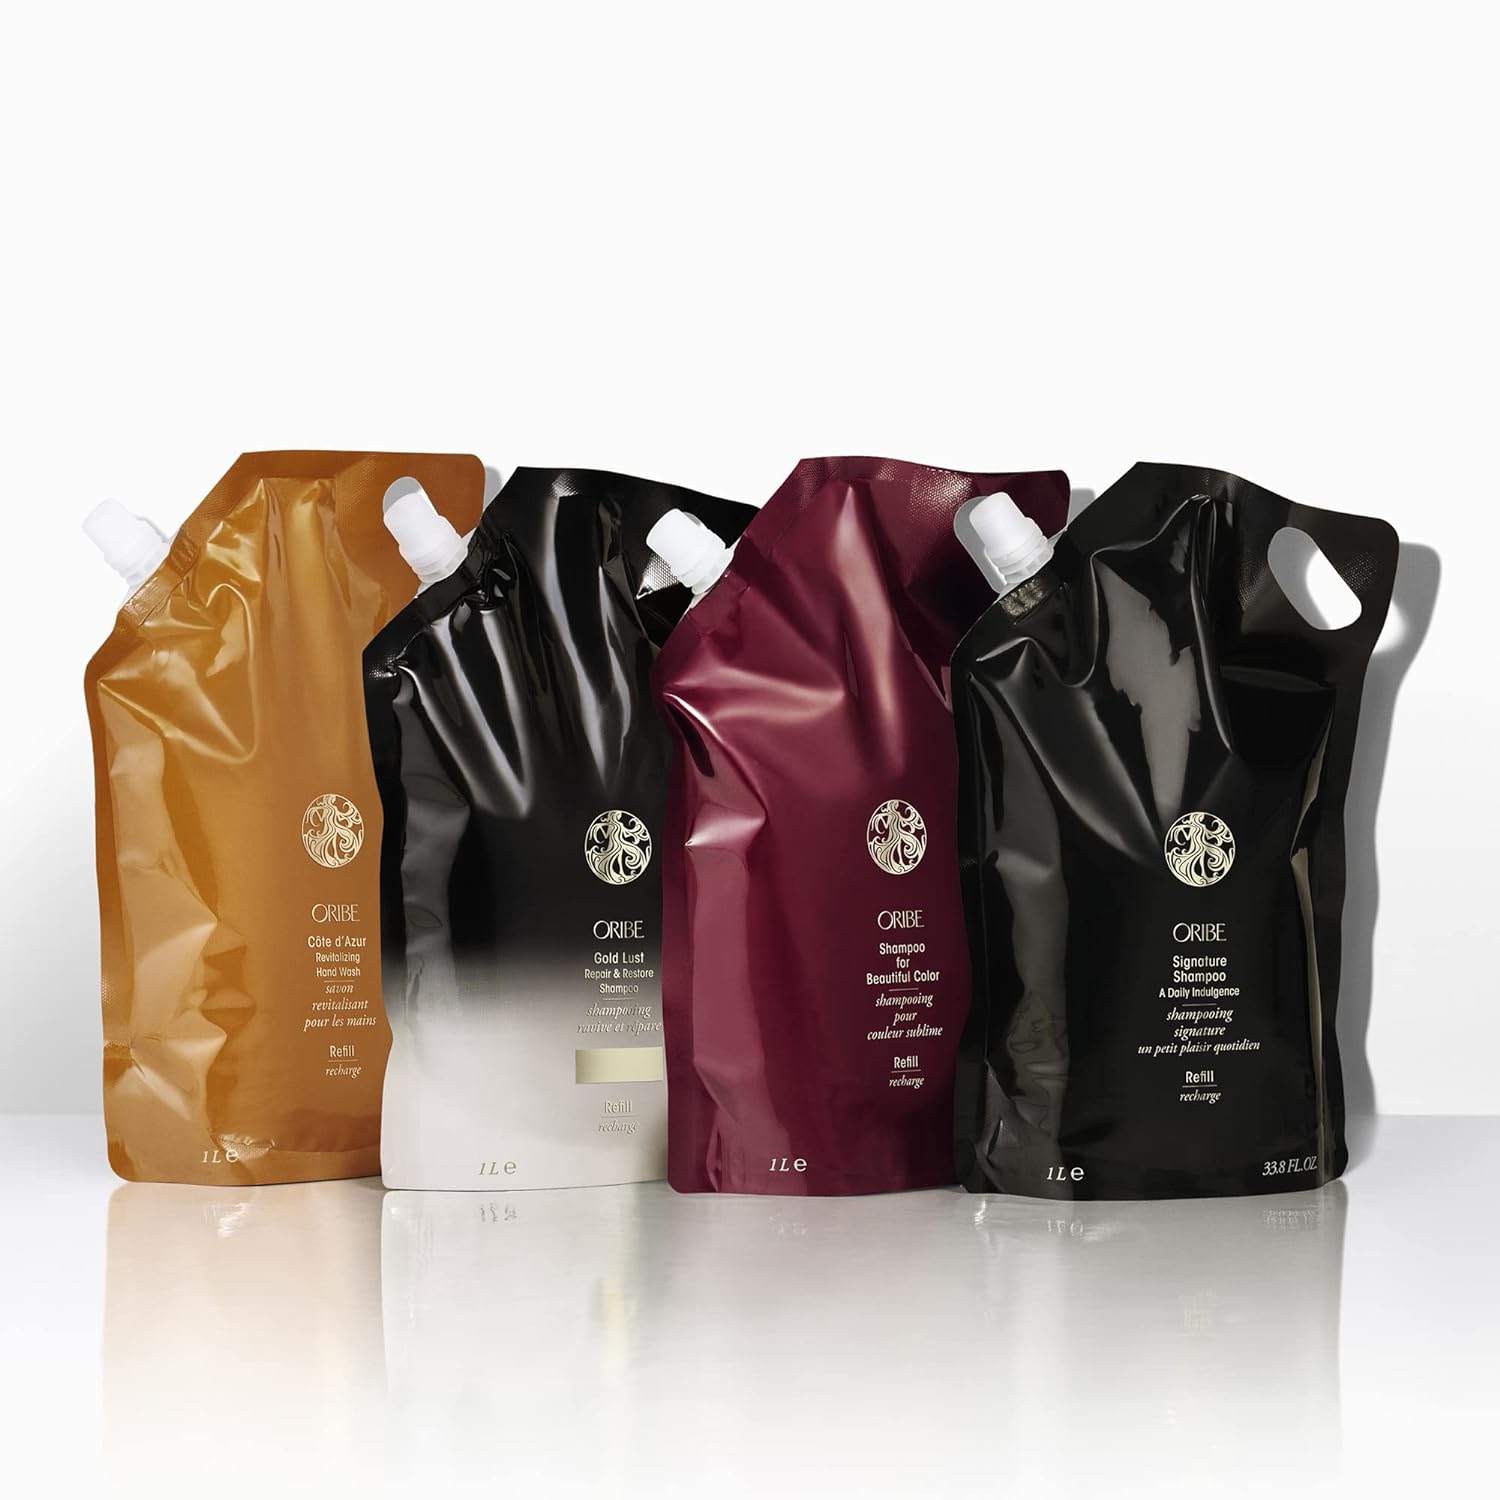 Buy ORIBE Signature Shampoo and Conditioner Liter Refill Bundle on Amazon.com ? FREE SHIPPING on qualified orders